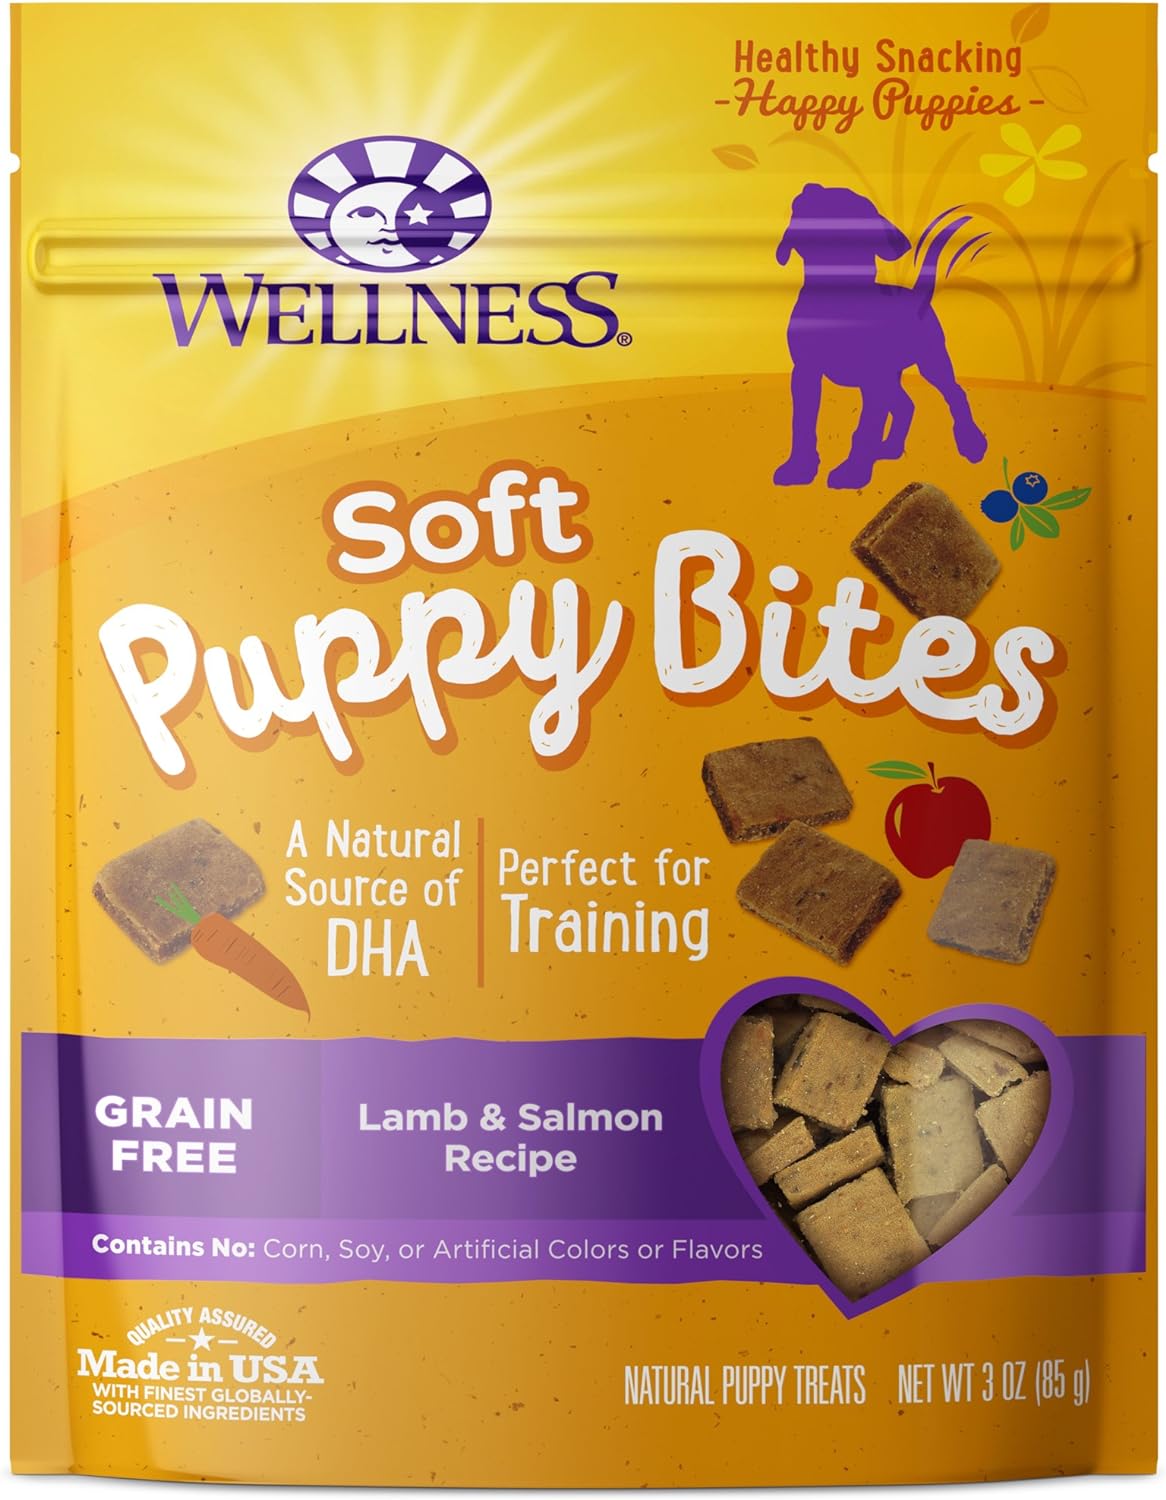 Wellness Soft Puppy Bites Natural Grain-Free Treats for Training, Dog Treats with Real Meat and DHA, No Artificial Flavors (Lamb  Salmon, 8-Ounce Bag)